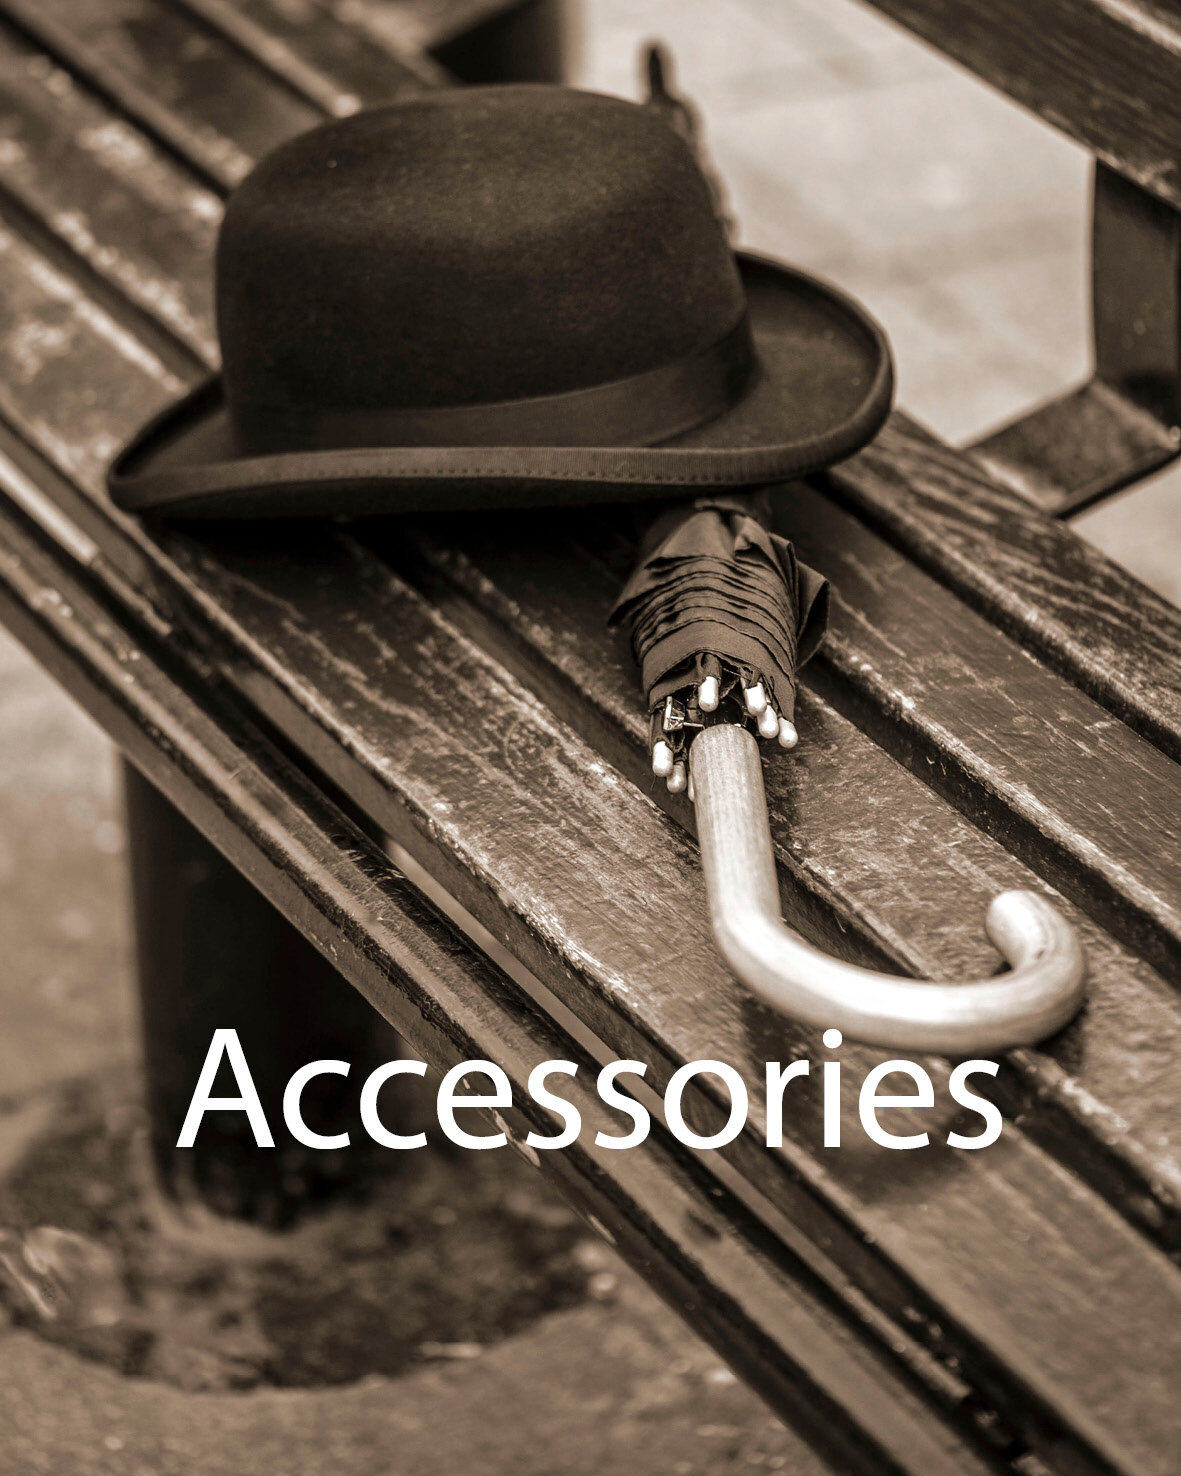 Image gate to Accessories page on Symonds of Hereford website